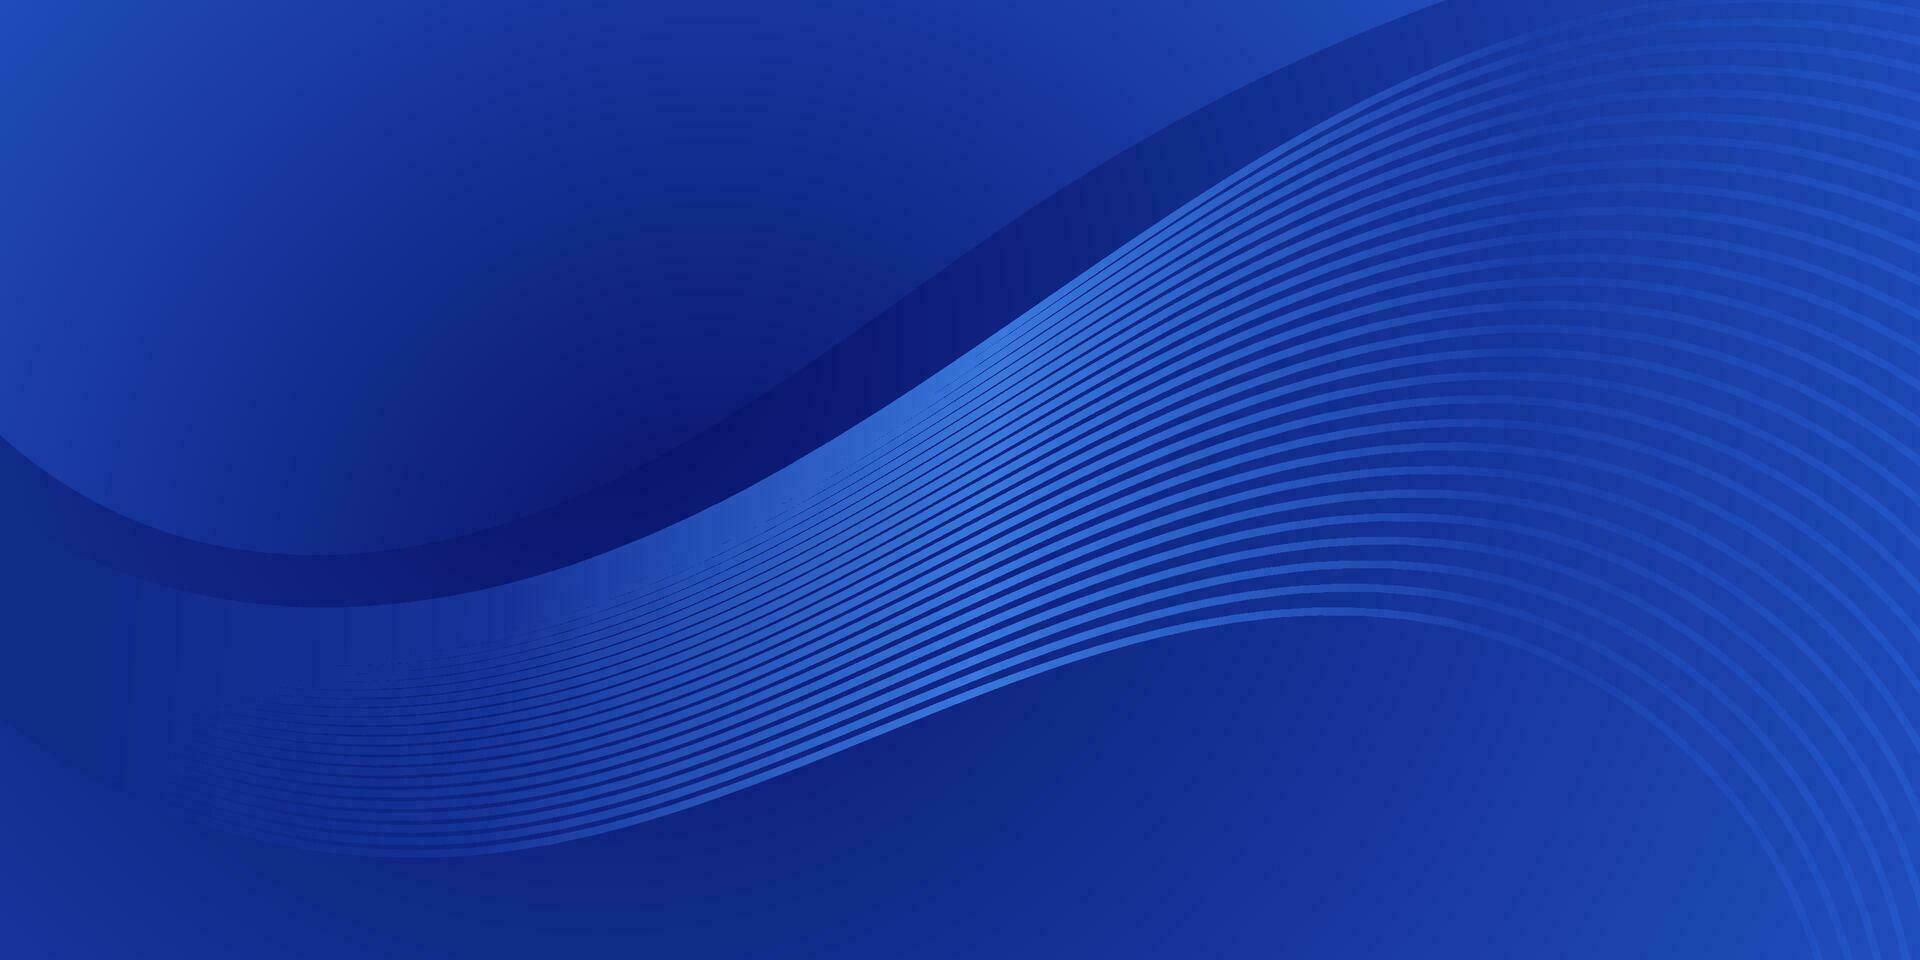 elegant blue abstract curve background with glowing lines vector